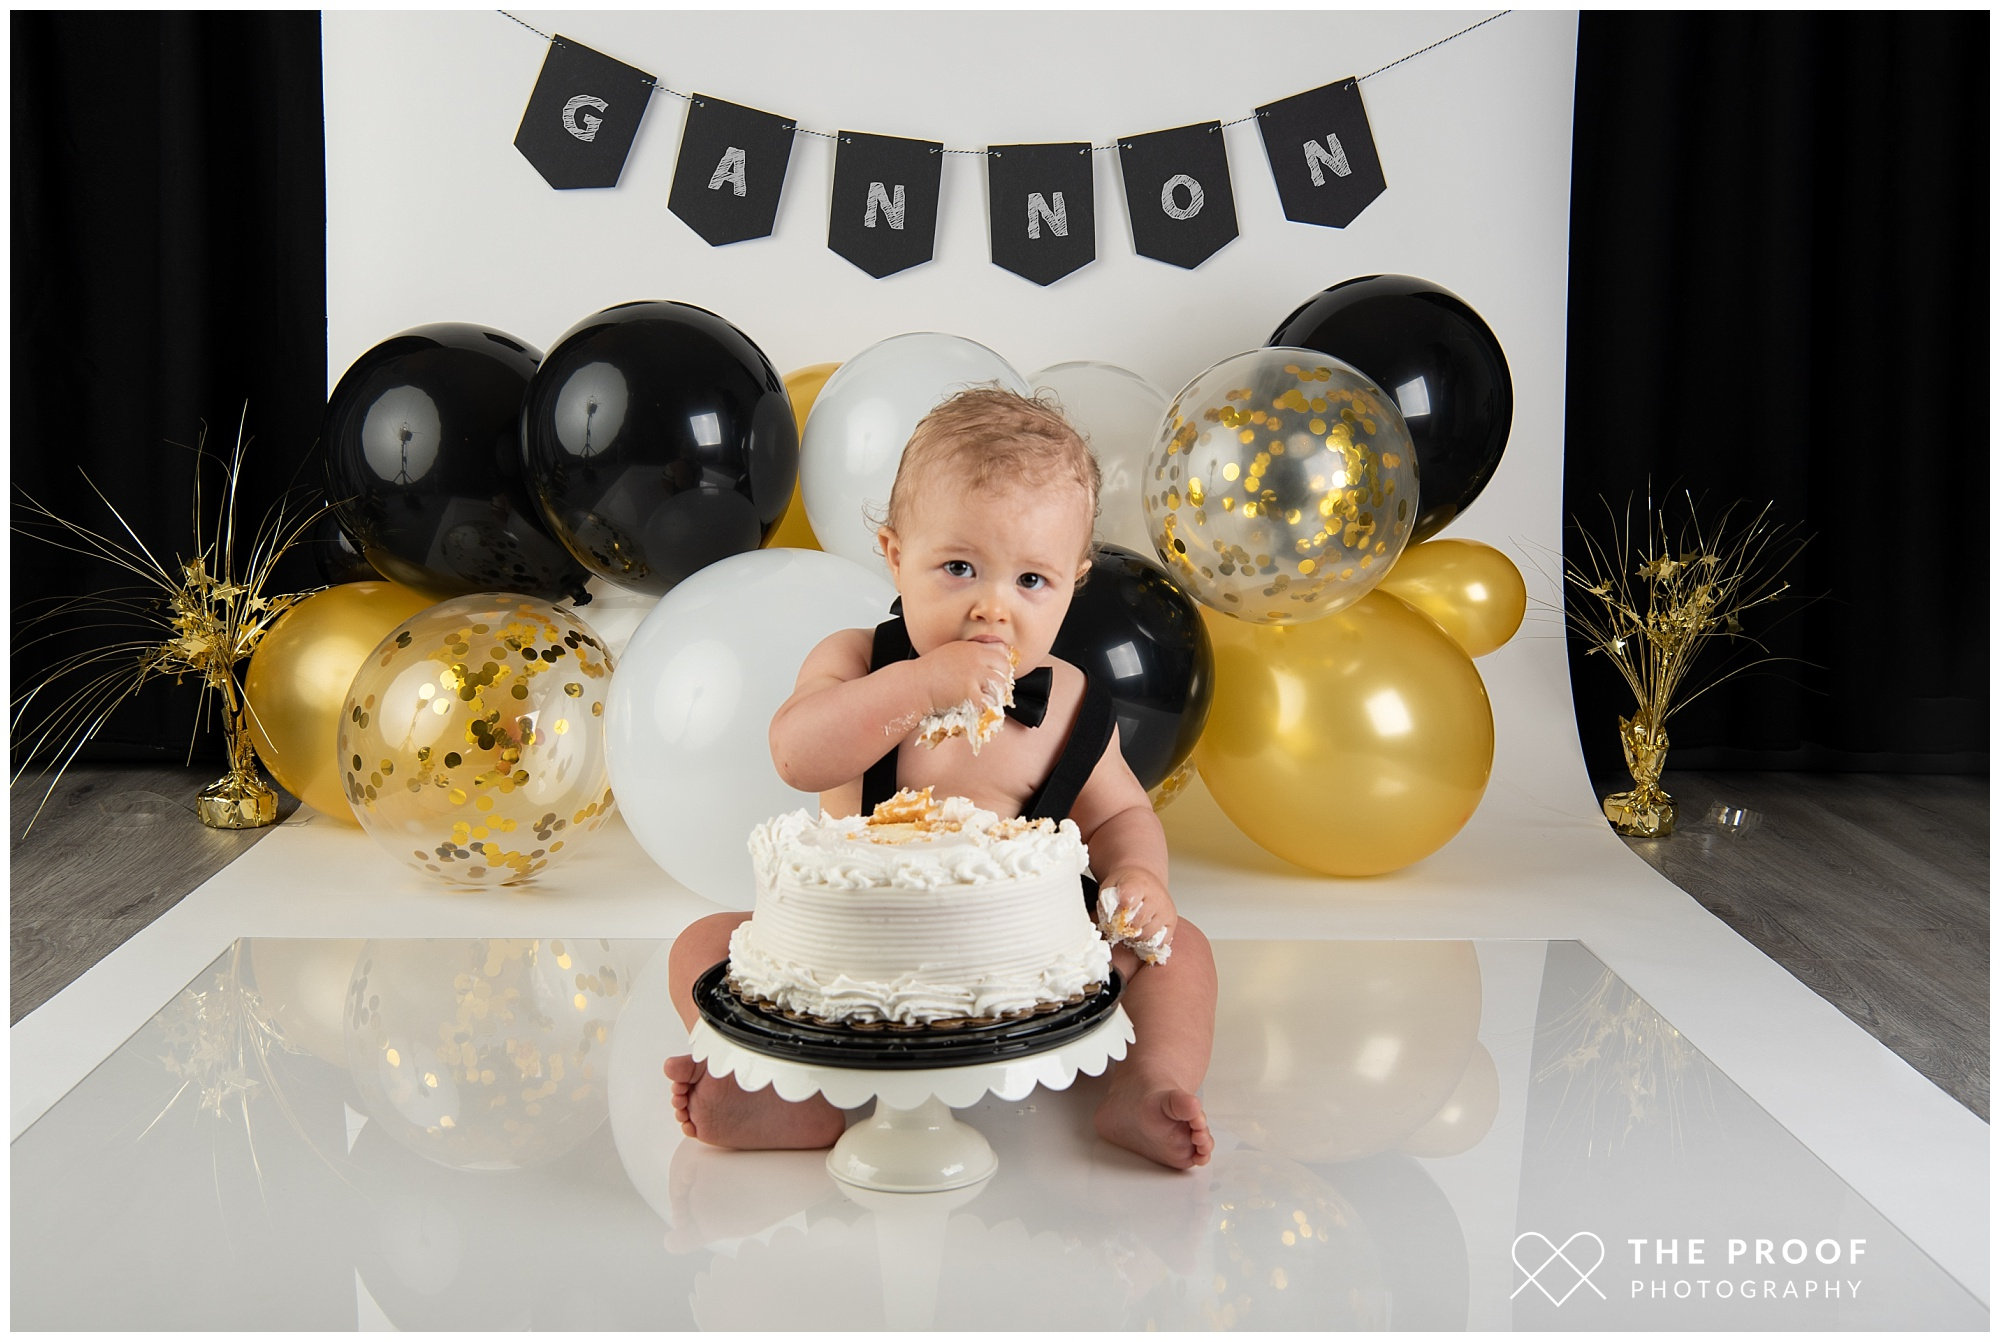 Smash Cake Recipes for Baby's First Birthday - Solid Starts